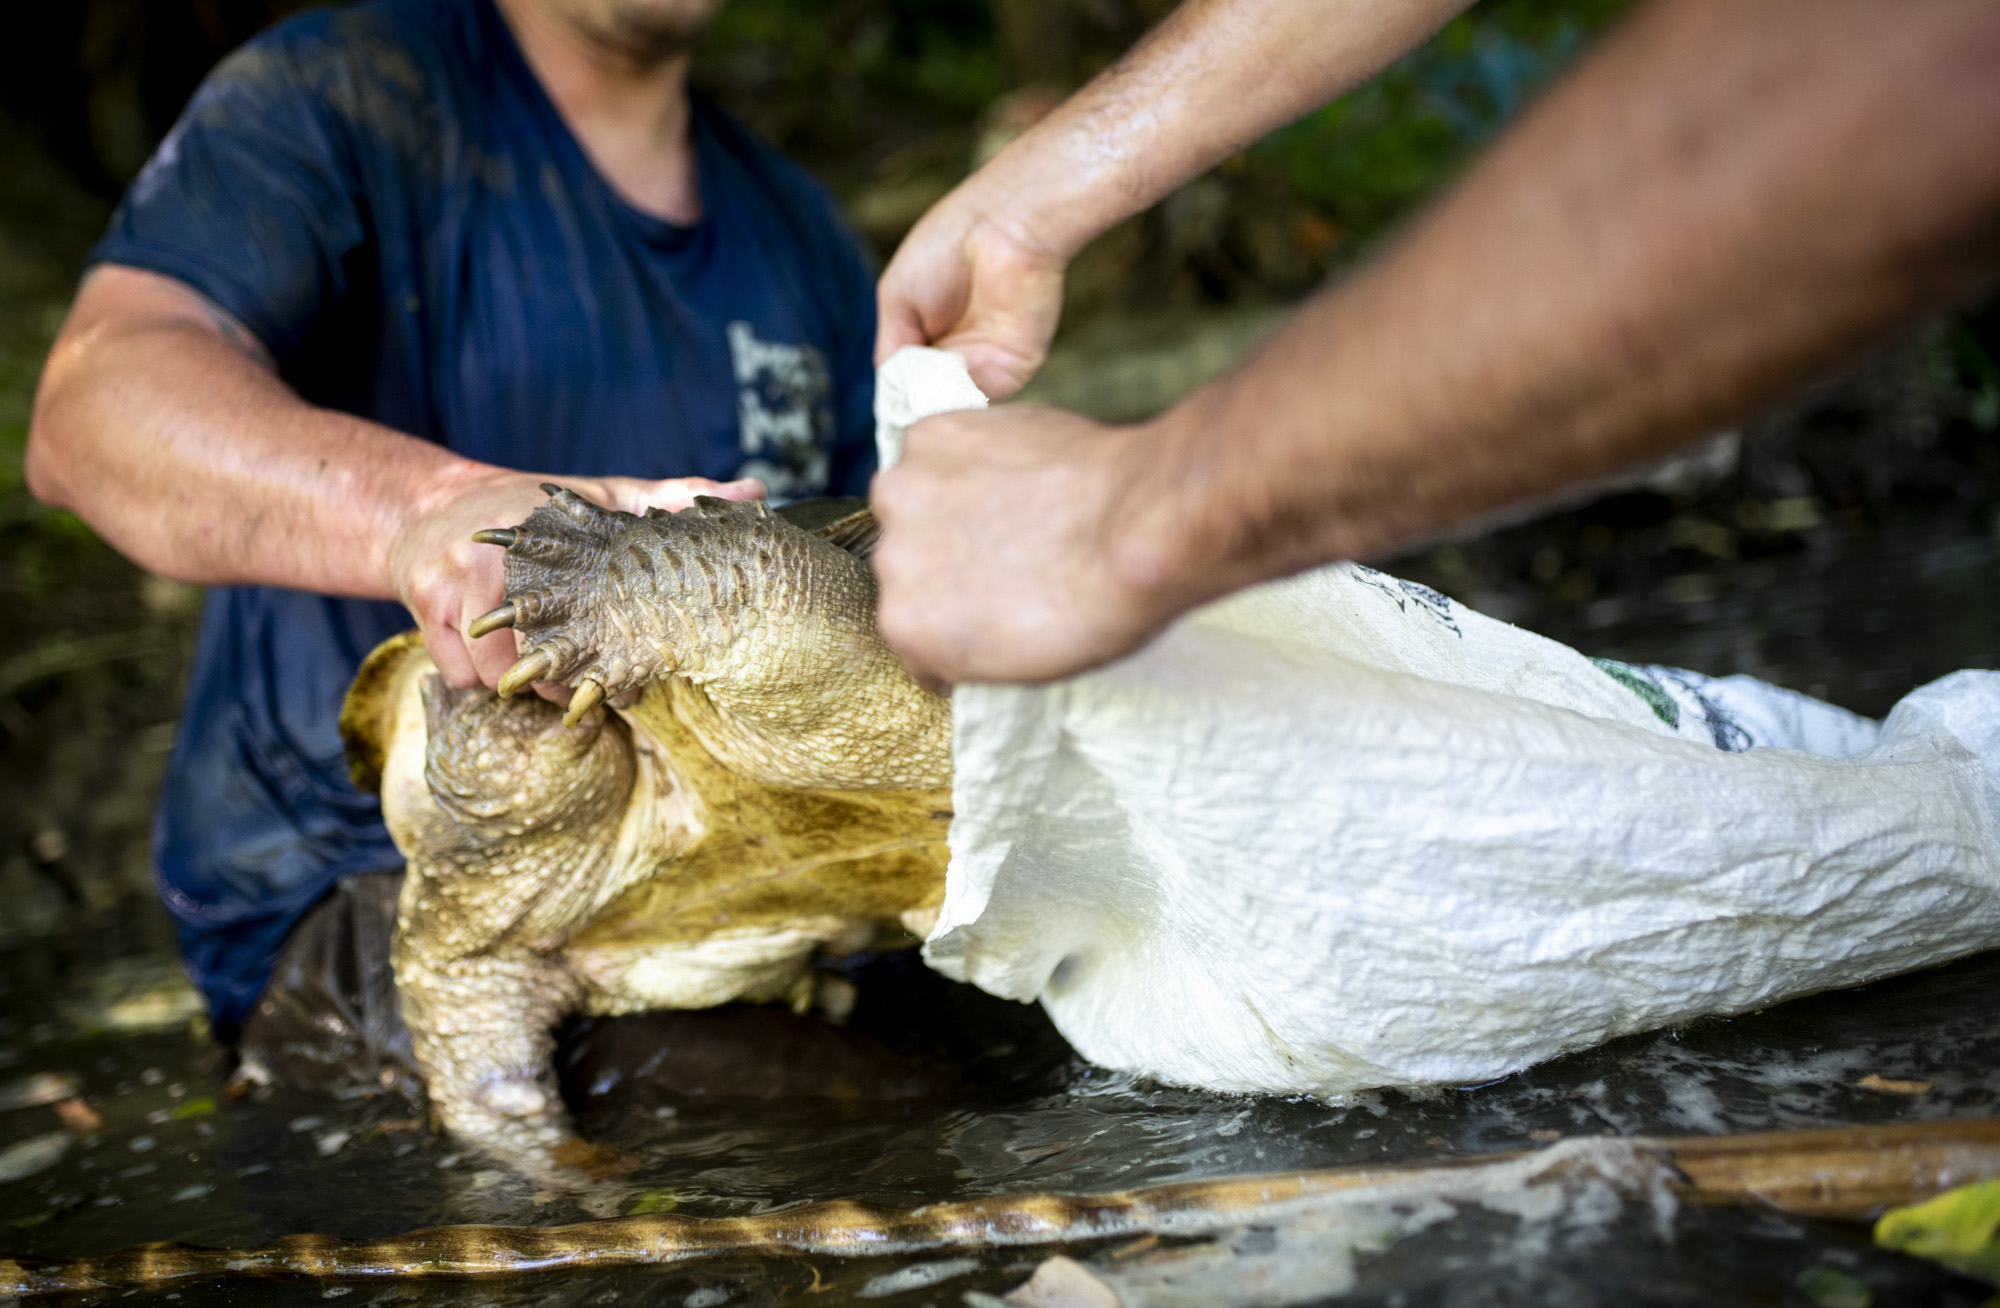  Joe Clemens holds open the bag to put the snapping turtle in so they can carry is while they hunt for more turtles. 